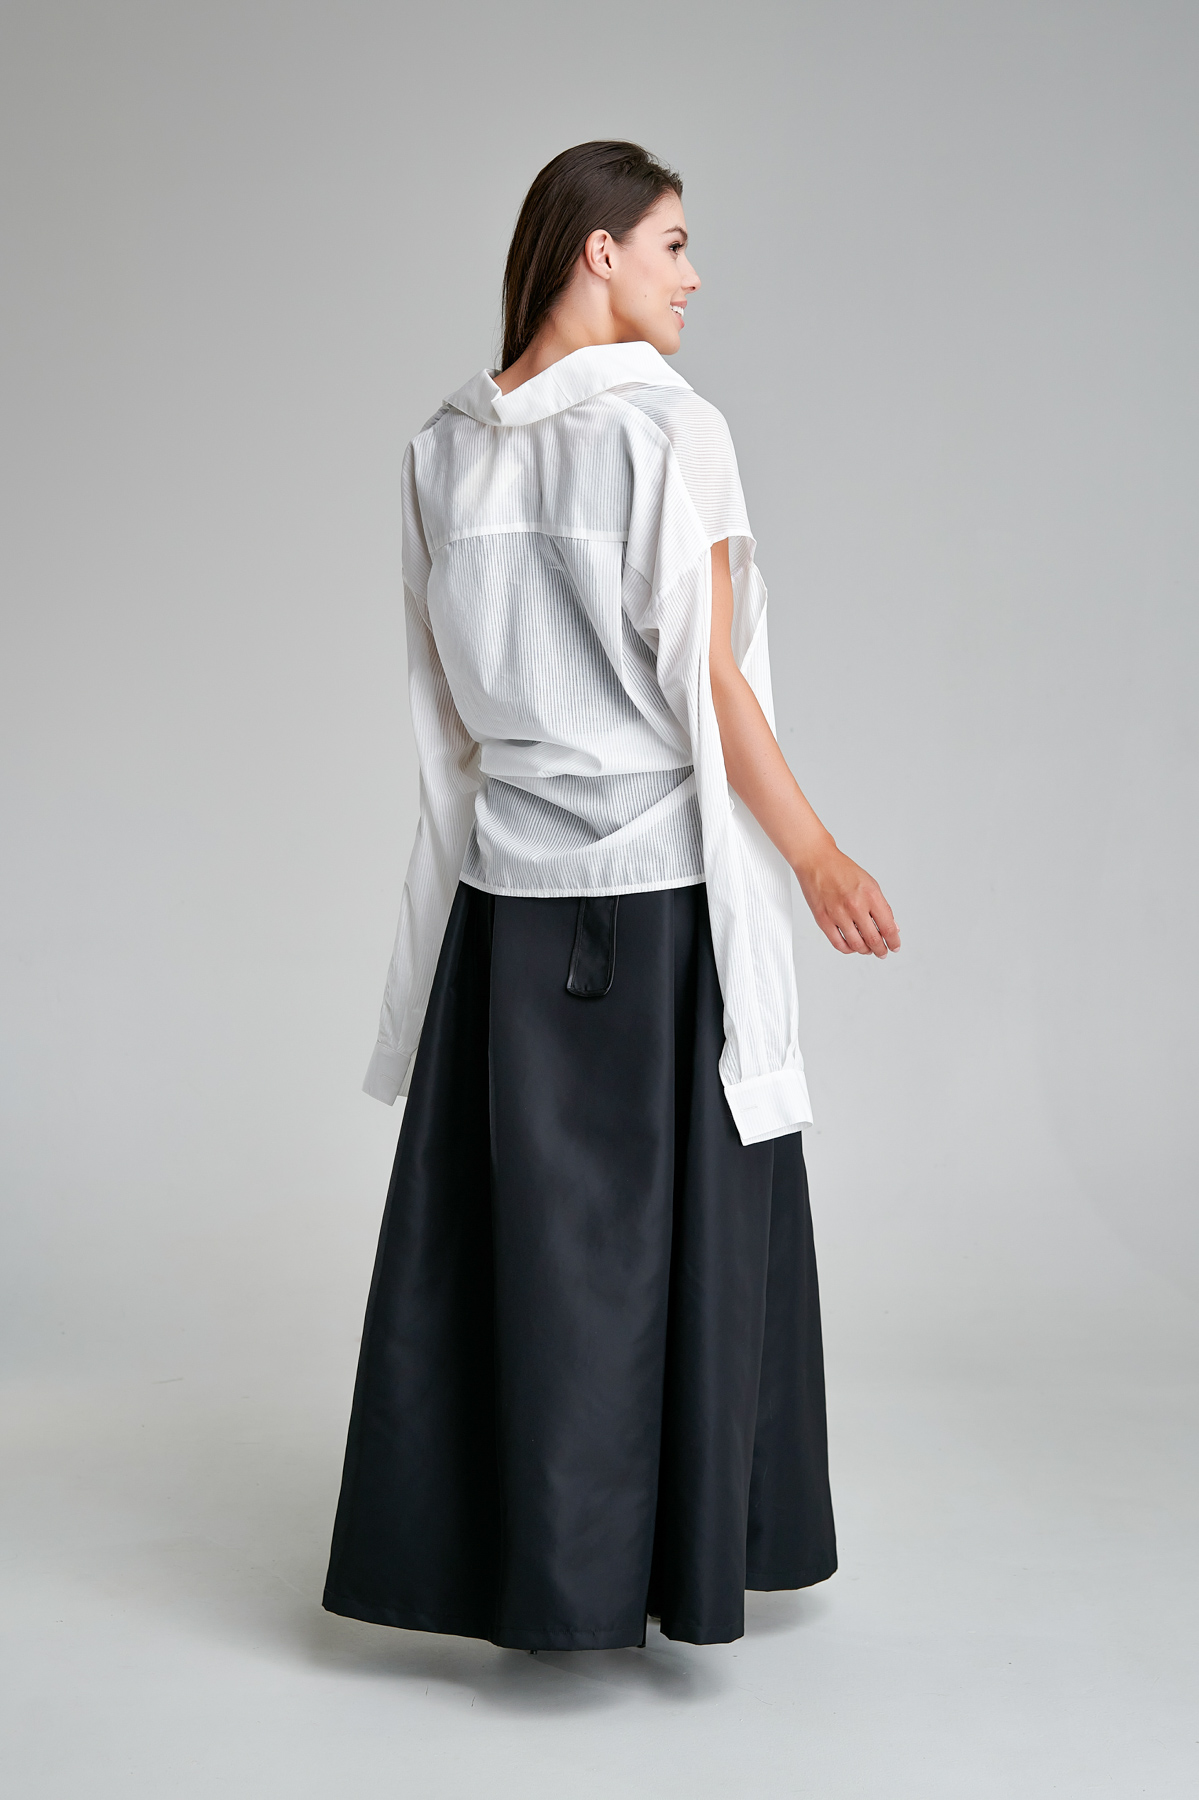 LEVI cotton shirt with cropped sleeves, white. Natural fabrics, original design, handmade embroidery